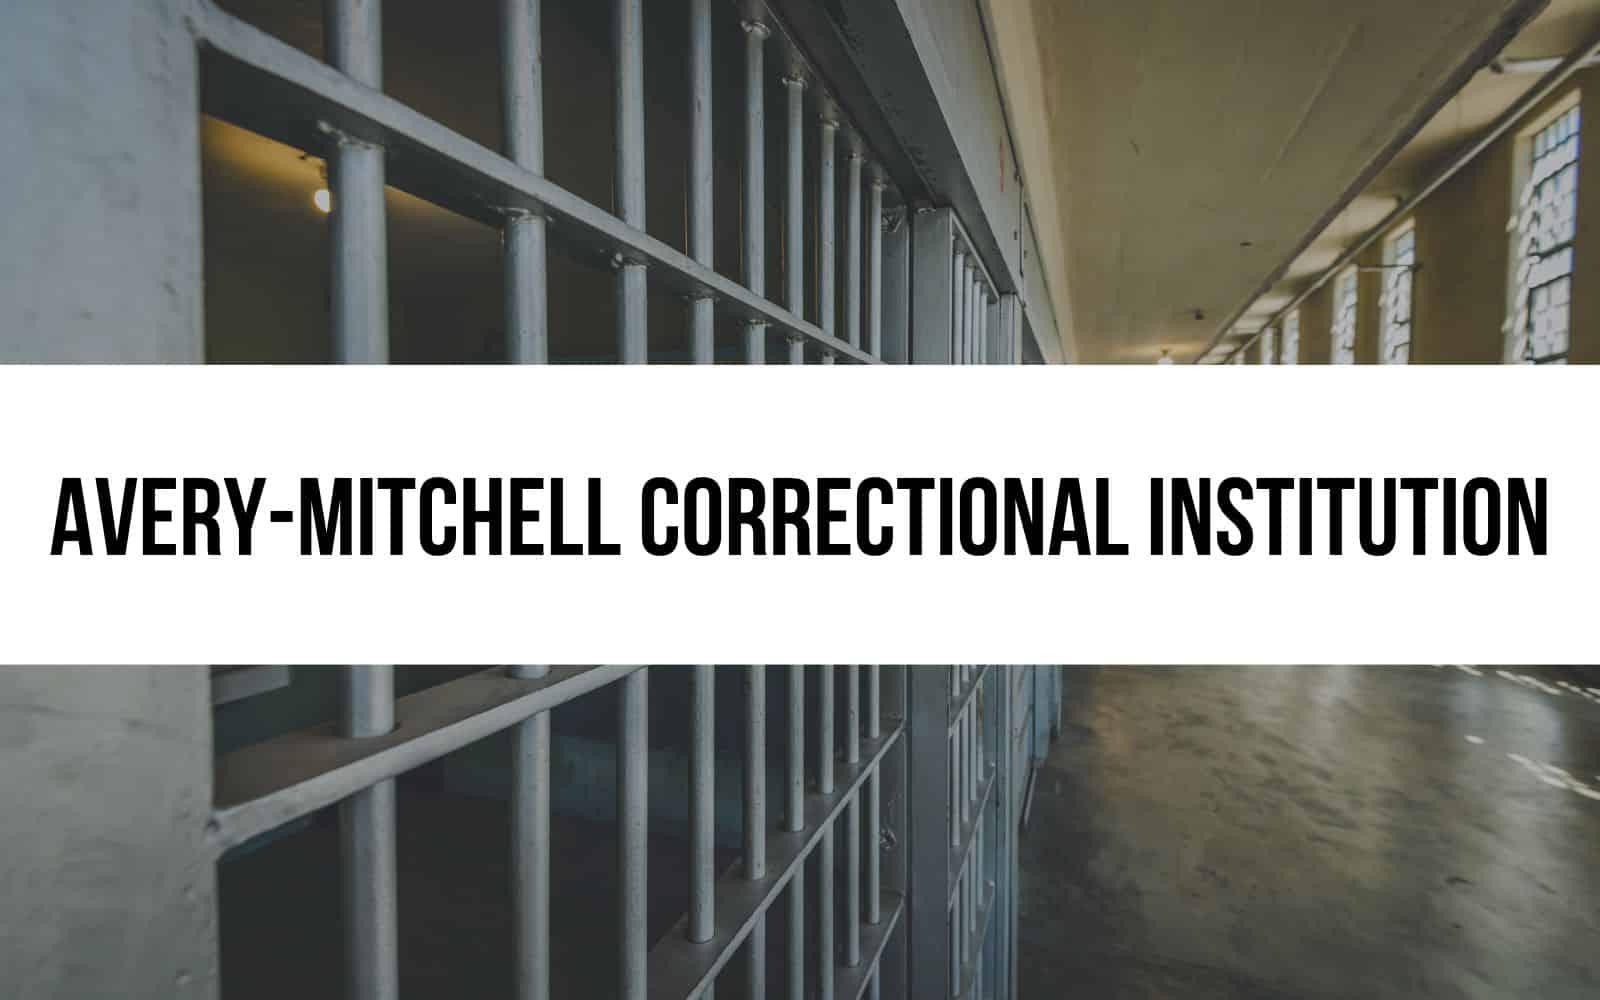 Avery-Mitchell Correctional Institution